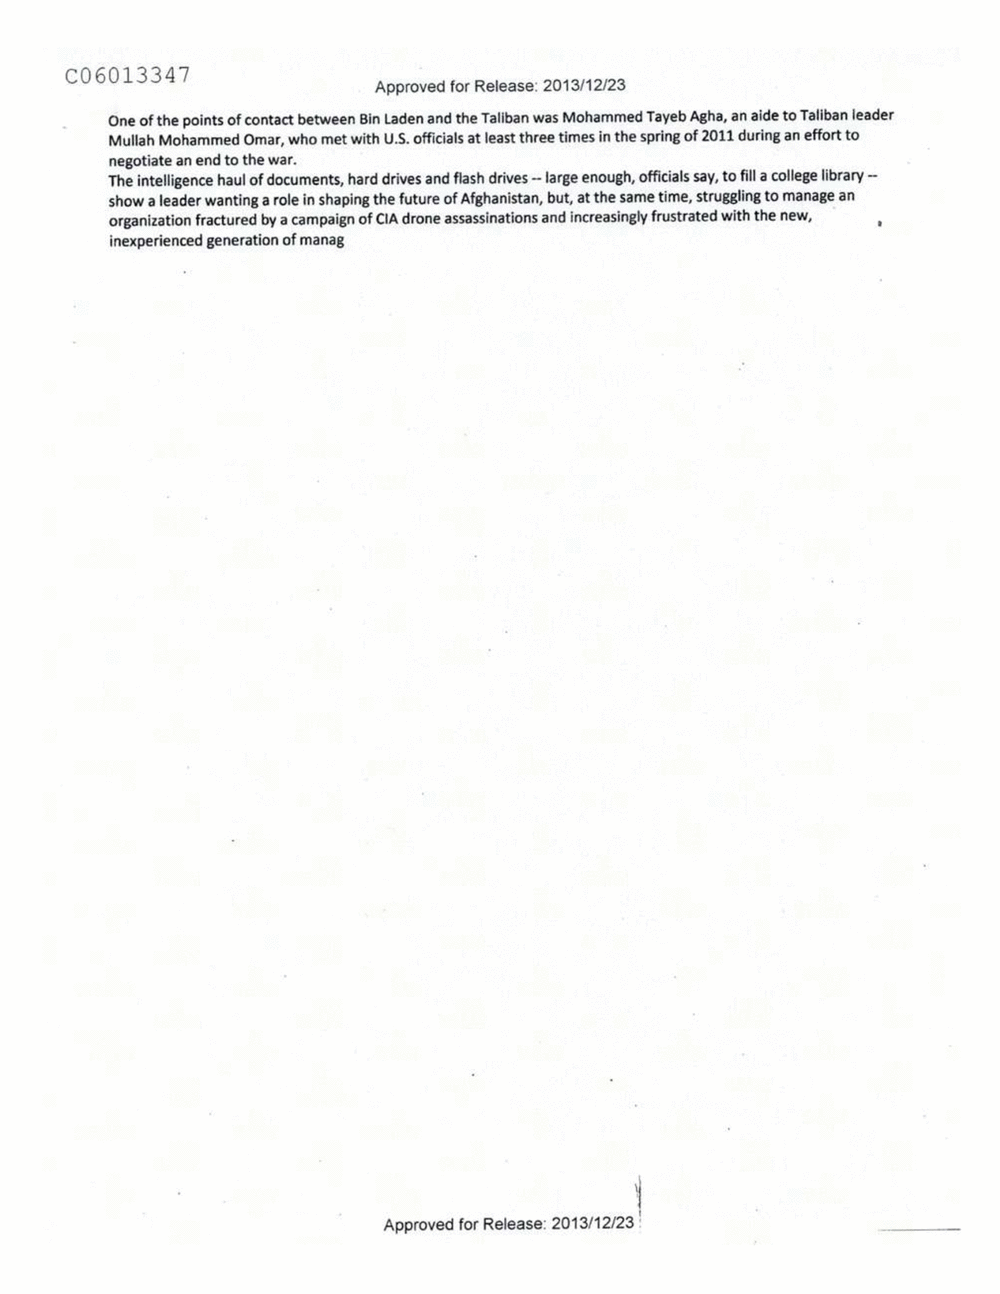 Page 256 from Email Correspondence Between Reporters and CIA Flacks